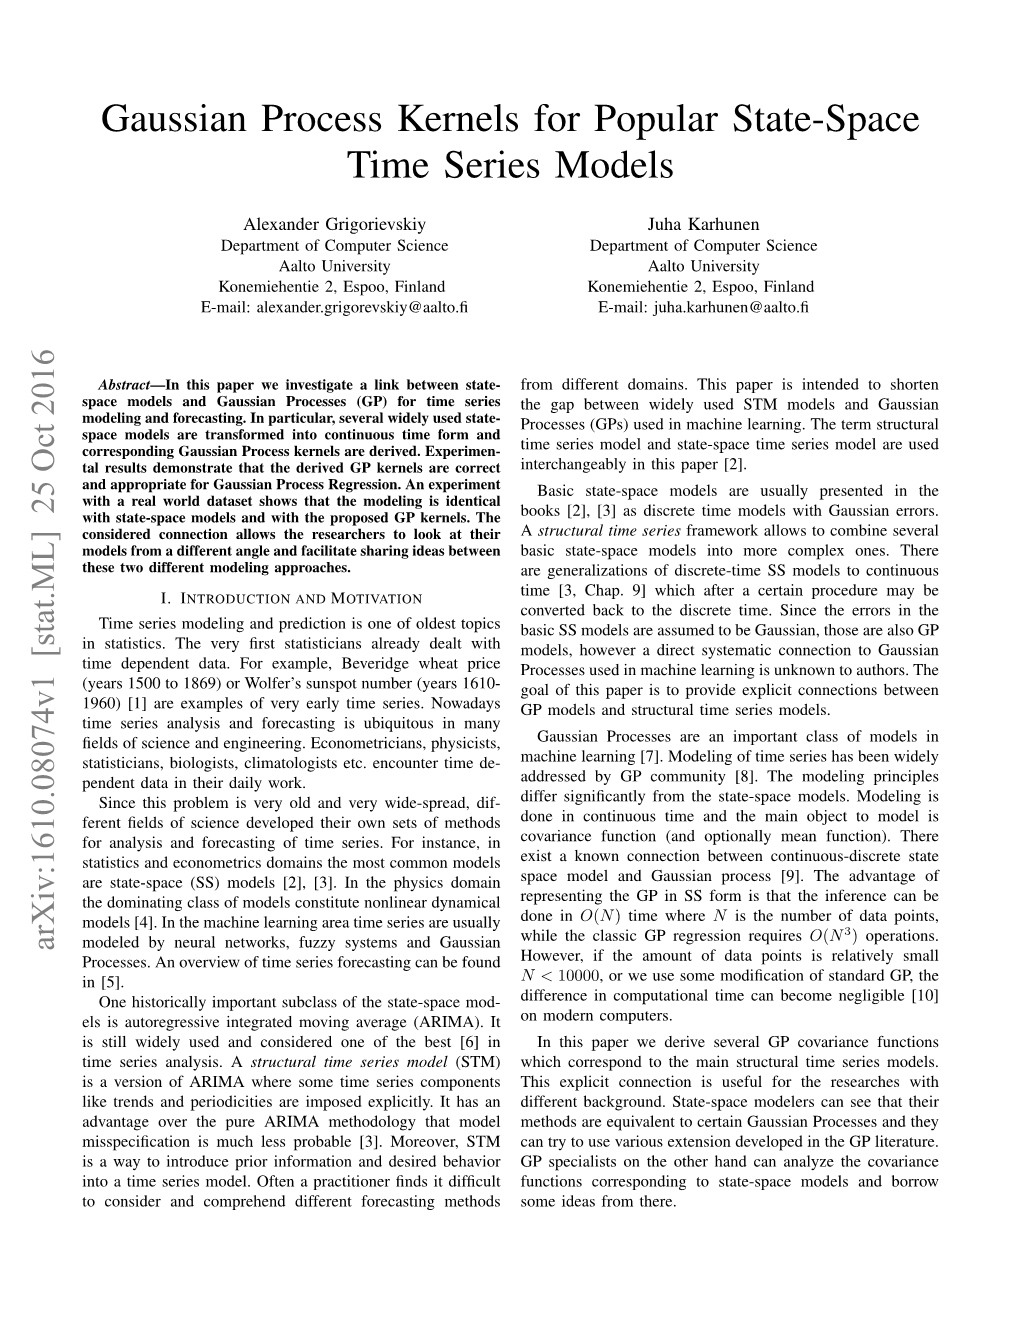 Gaussian Process Kernels for Popular State-Space Time Series Models